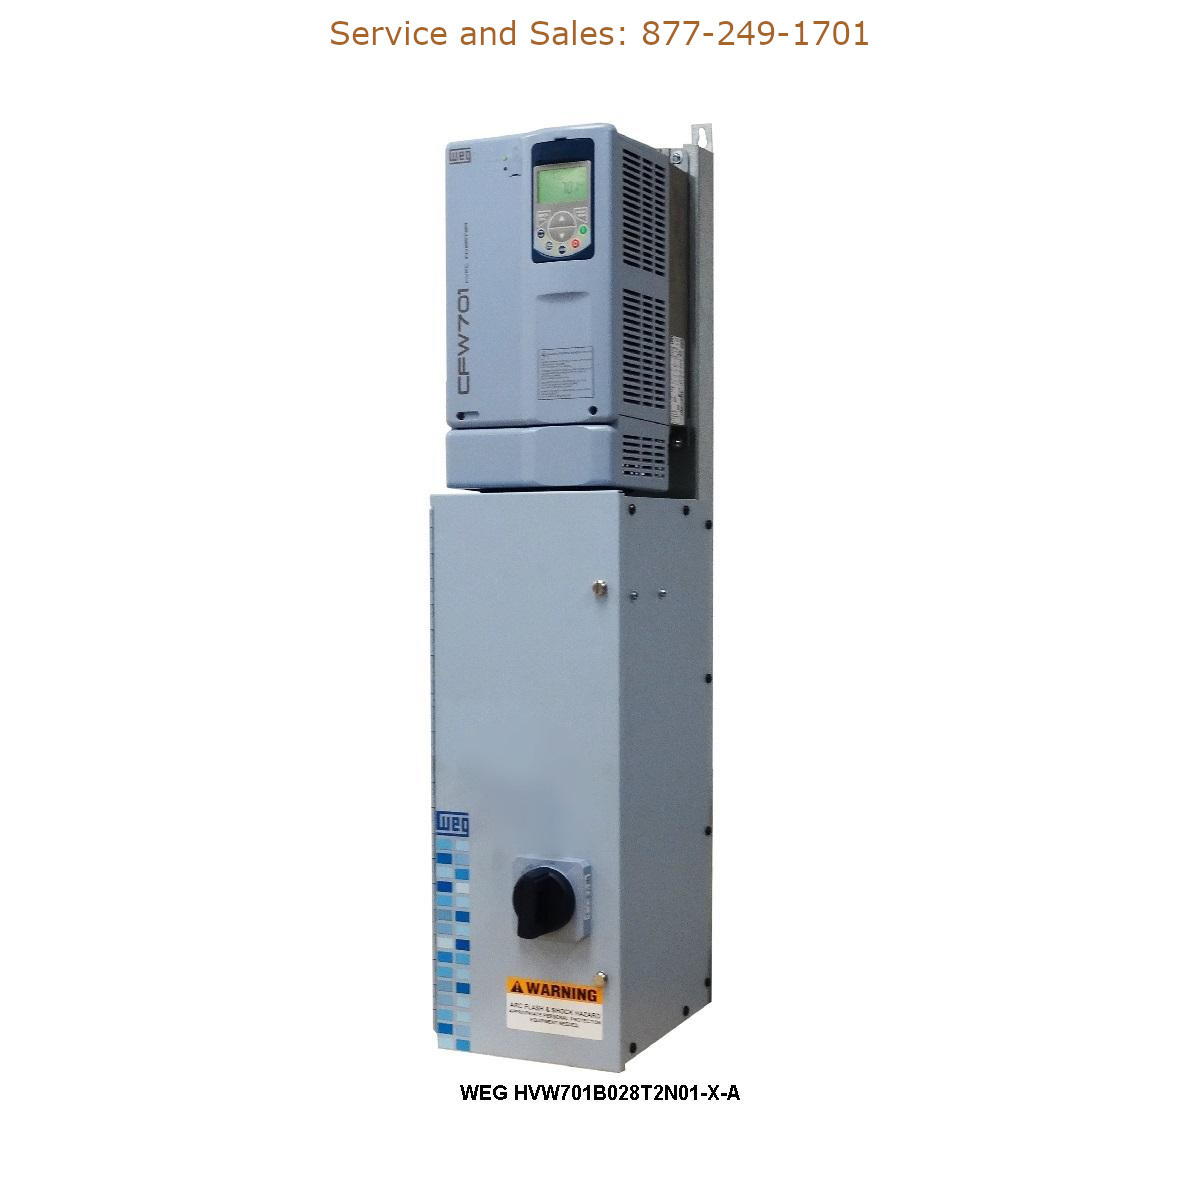 WEG HVW701B028T2N01-X-A WEG Model Number HVW701B028T2N01-X-A WEG Drives, Variable Speed Drives Repair Service, Troubleshooting, Replacement Parts https://gesrepair.com/wp-content/uploads/2022/WEG/WEG_HVW701B028T2N01-X-A_Drives_Variable_Speed_Drives.jpg